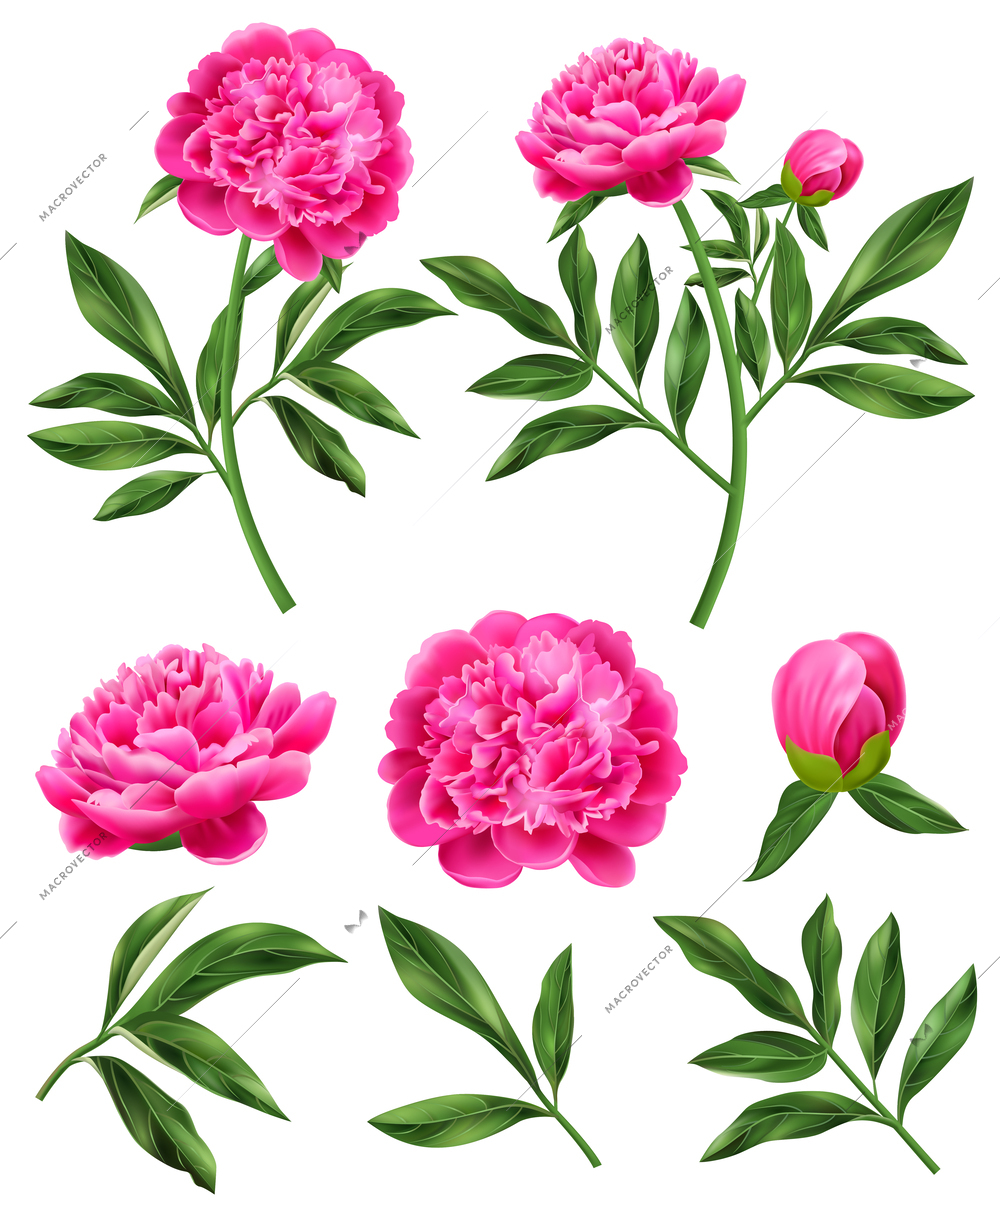 Realistic set of pink peony flowers and green leaves isolated vector illustration